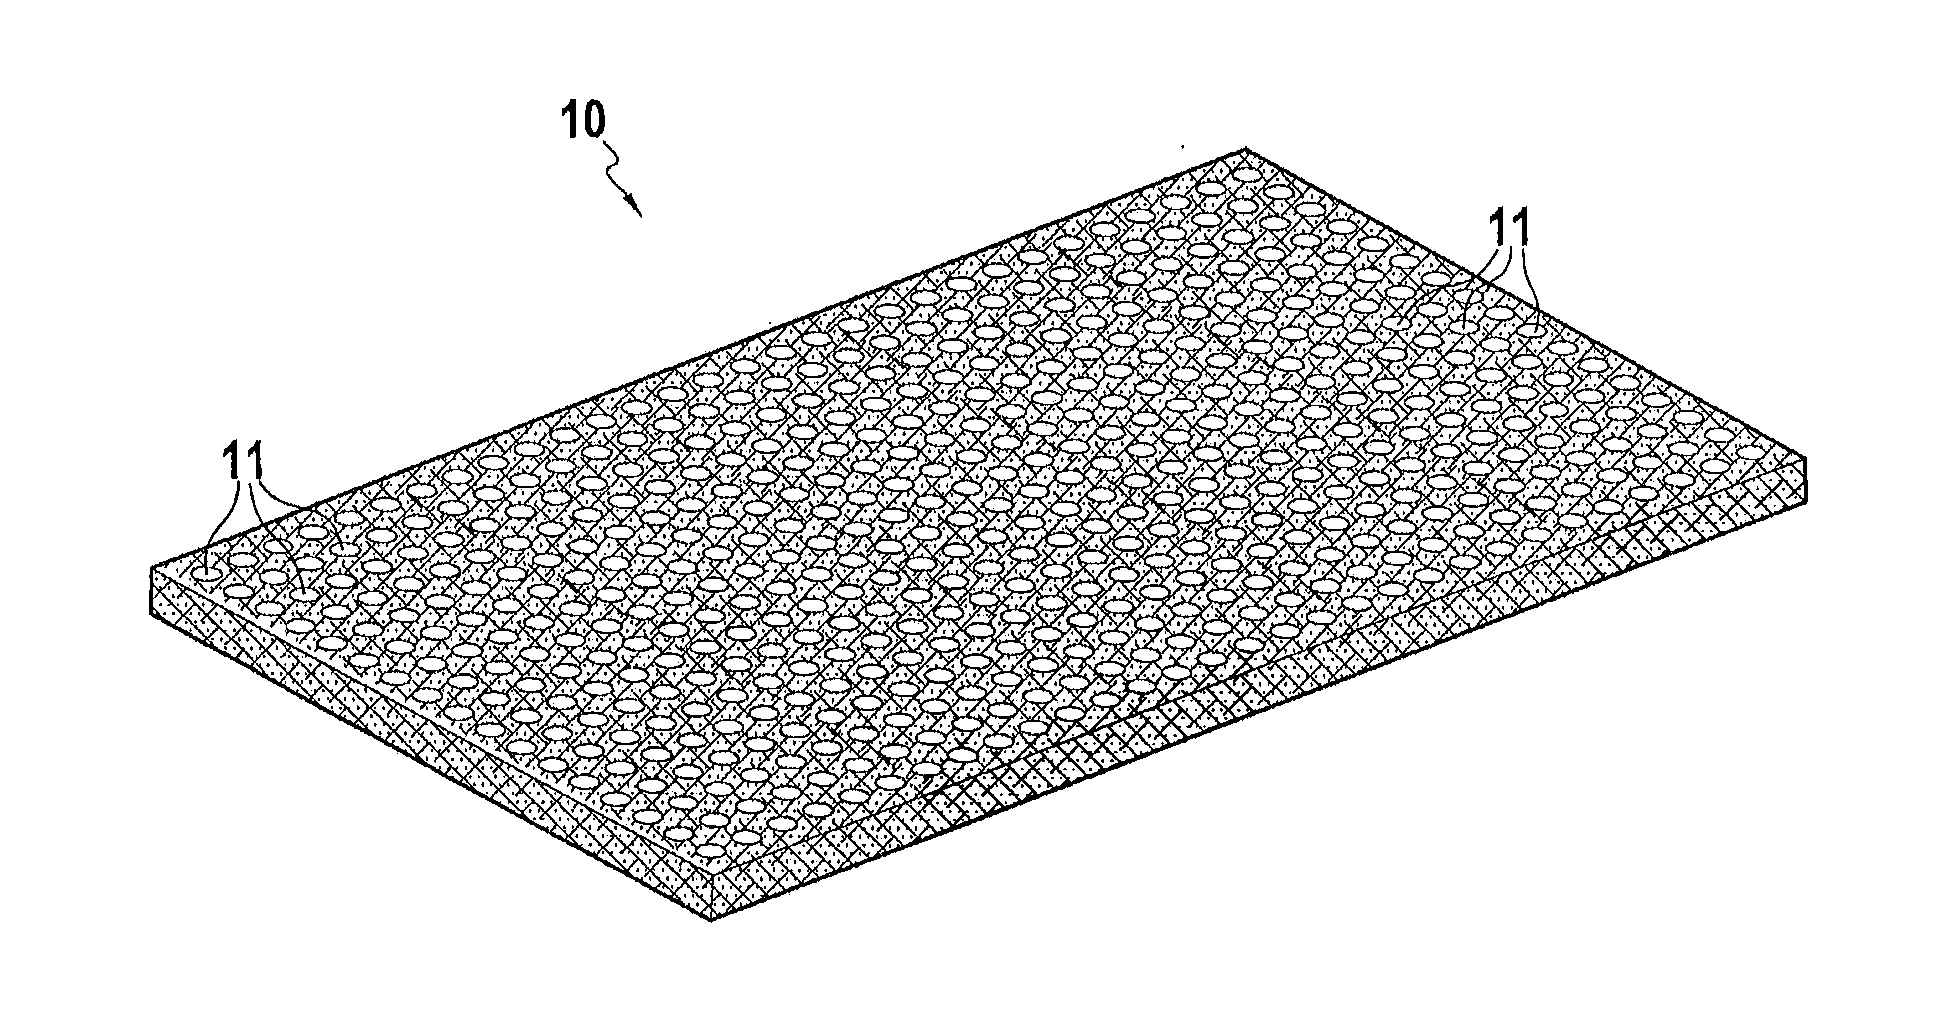 Process for manufacturing a multiperforated composite part